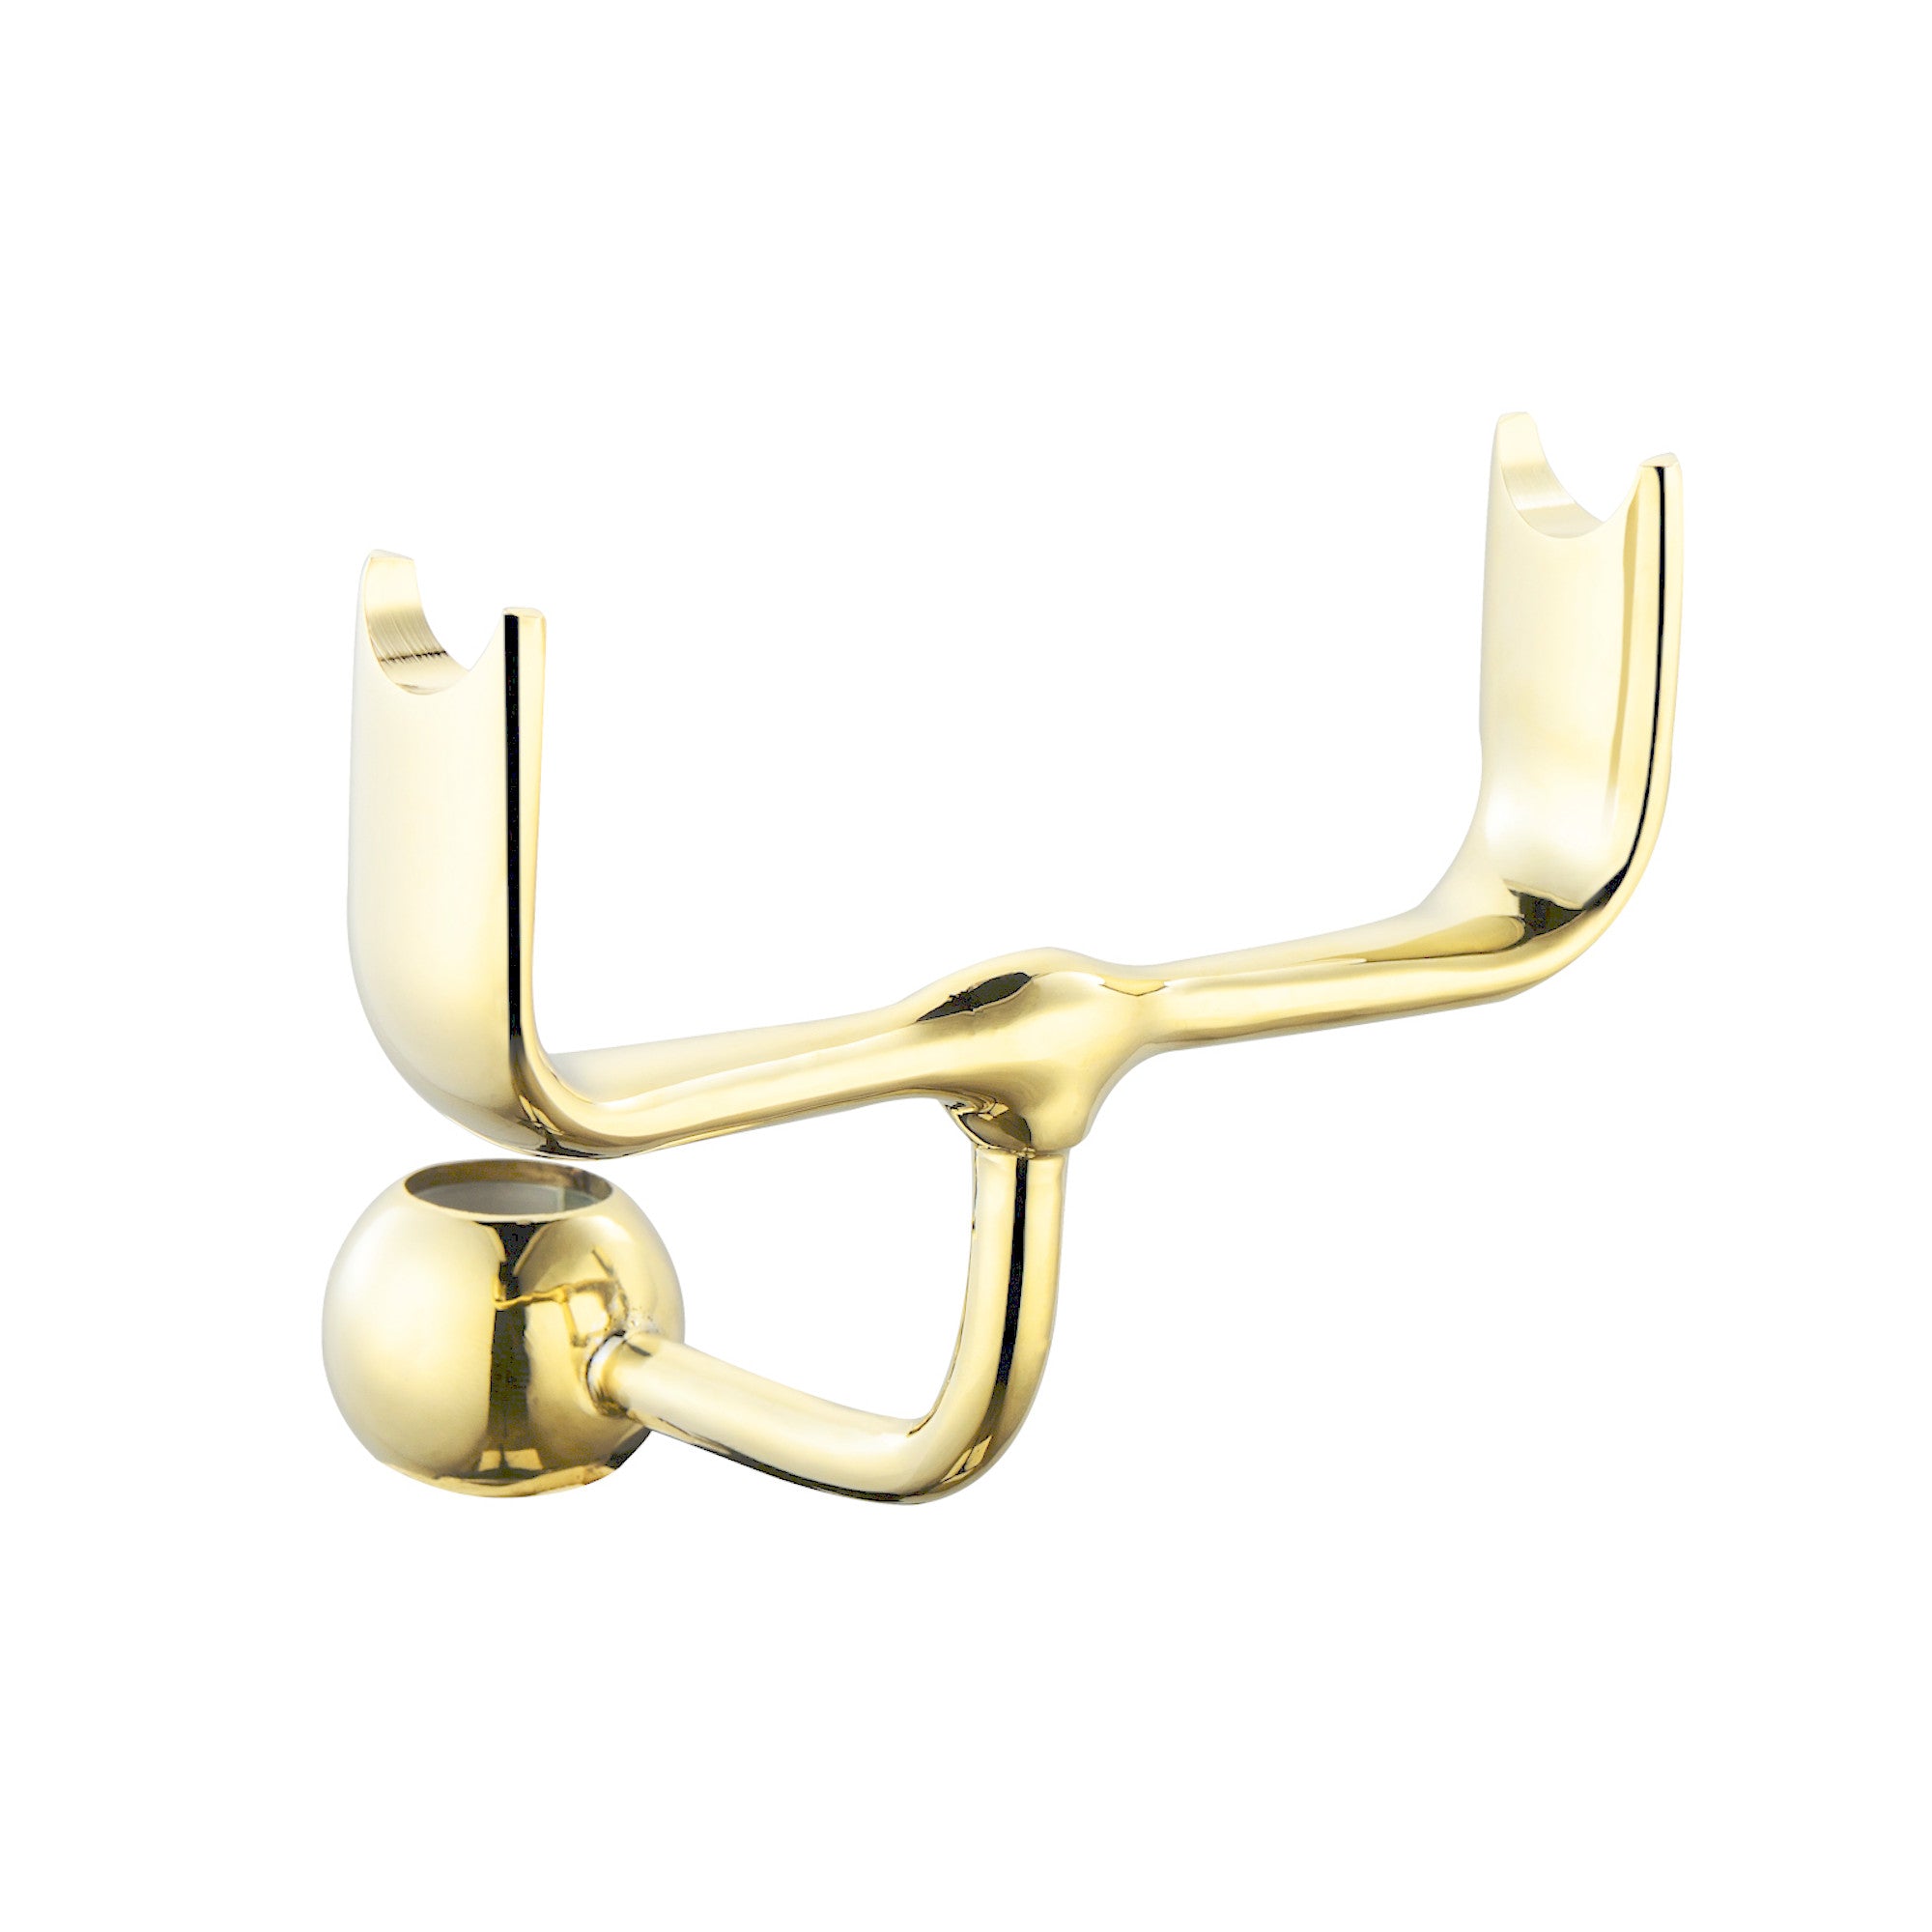 Telephone style rigid riser bracket for shower heads solid brass - gold - Showers